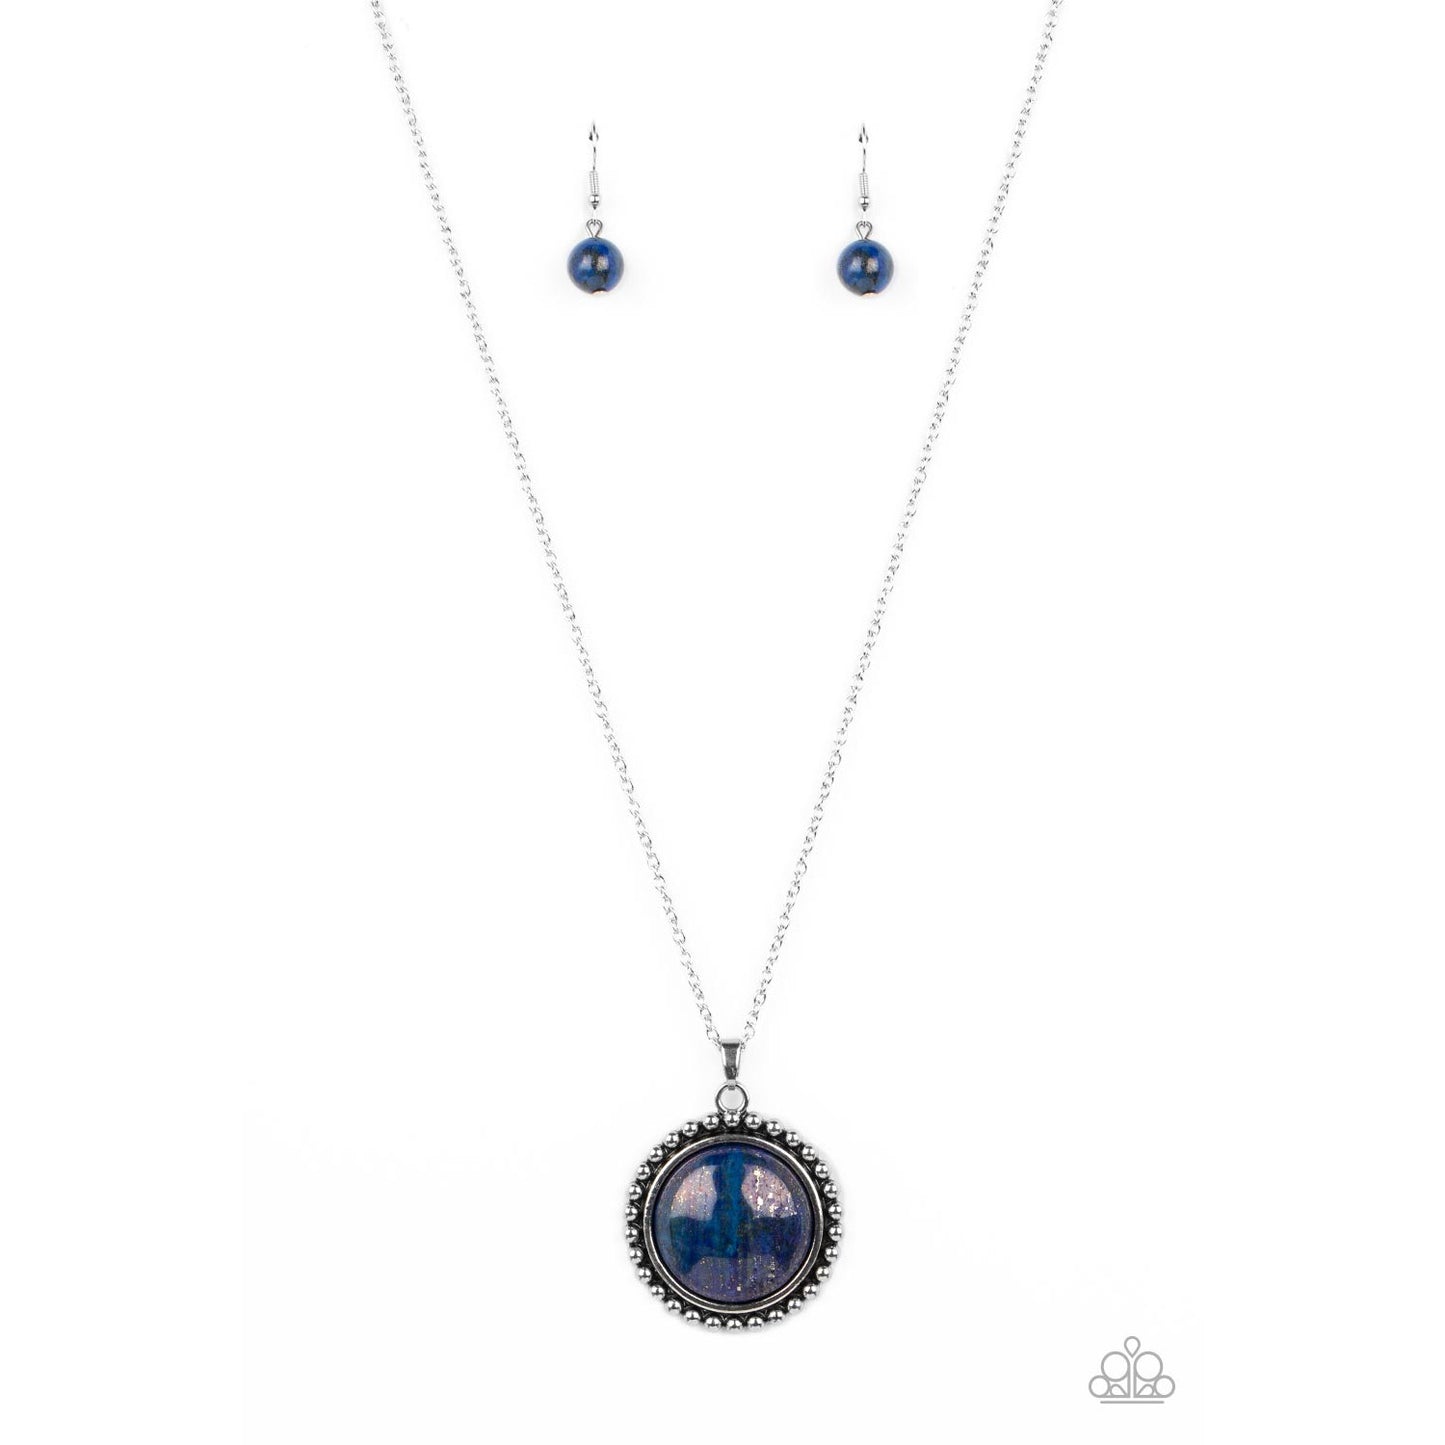 Sonoran Summer - Blue Necklace - Bling by Danielle Baker